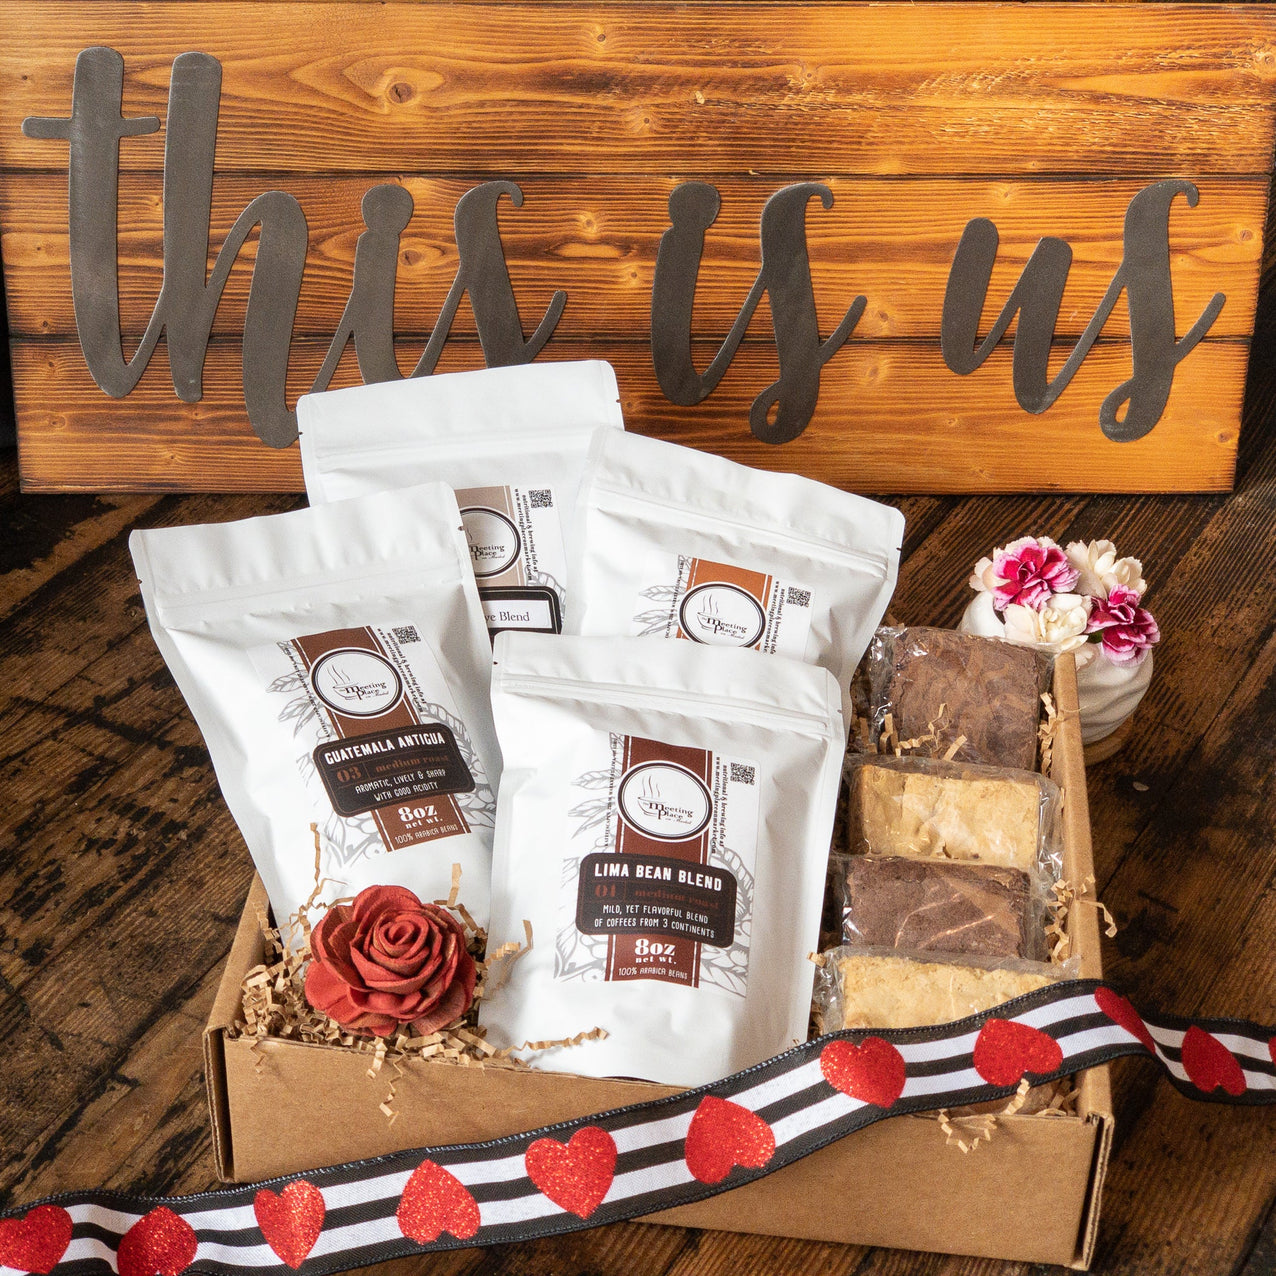 Premium Coffee Lovers Valentine's Gift Valentine's Day Gift Basket - The Meeting Place on Market